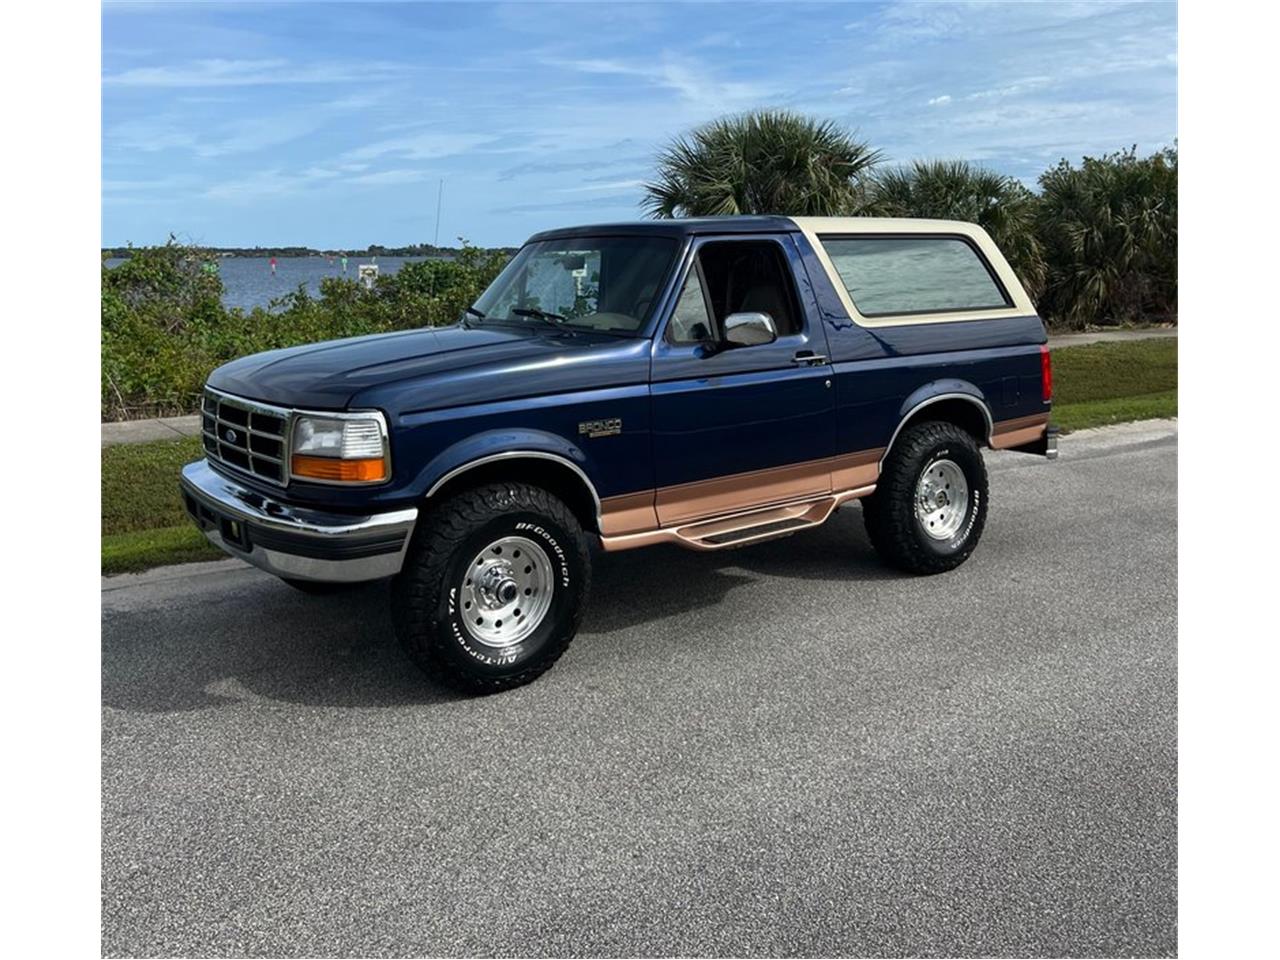 For Sale at Auction: 1995 Ford Bronco in Greensboro, North Carolina for sale in Greensboro, NC